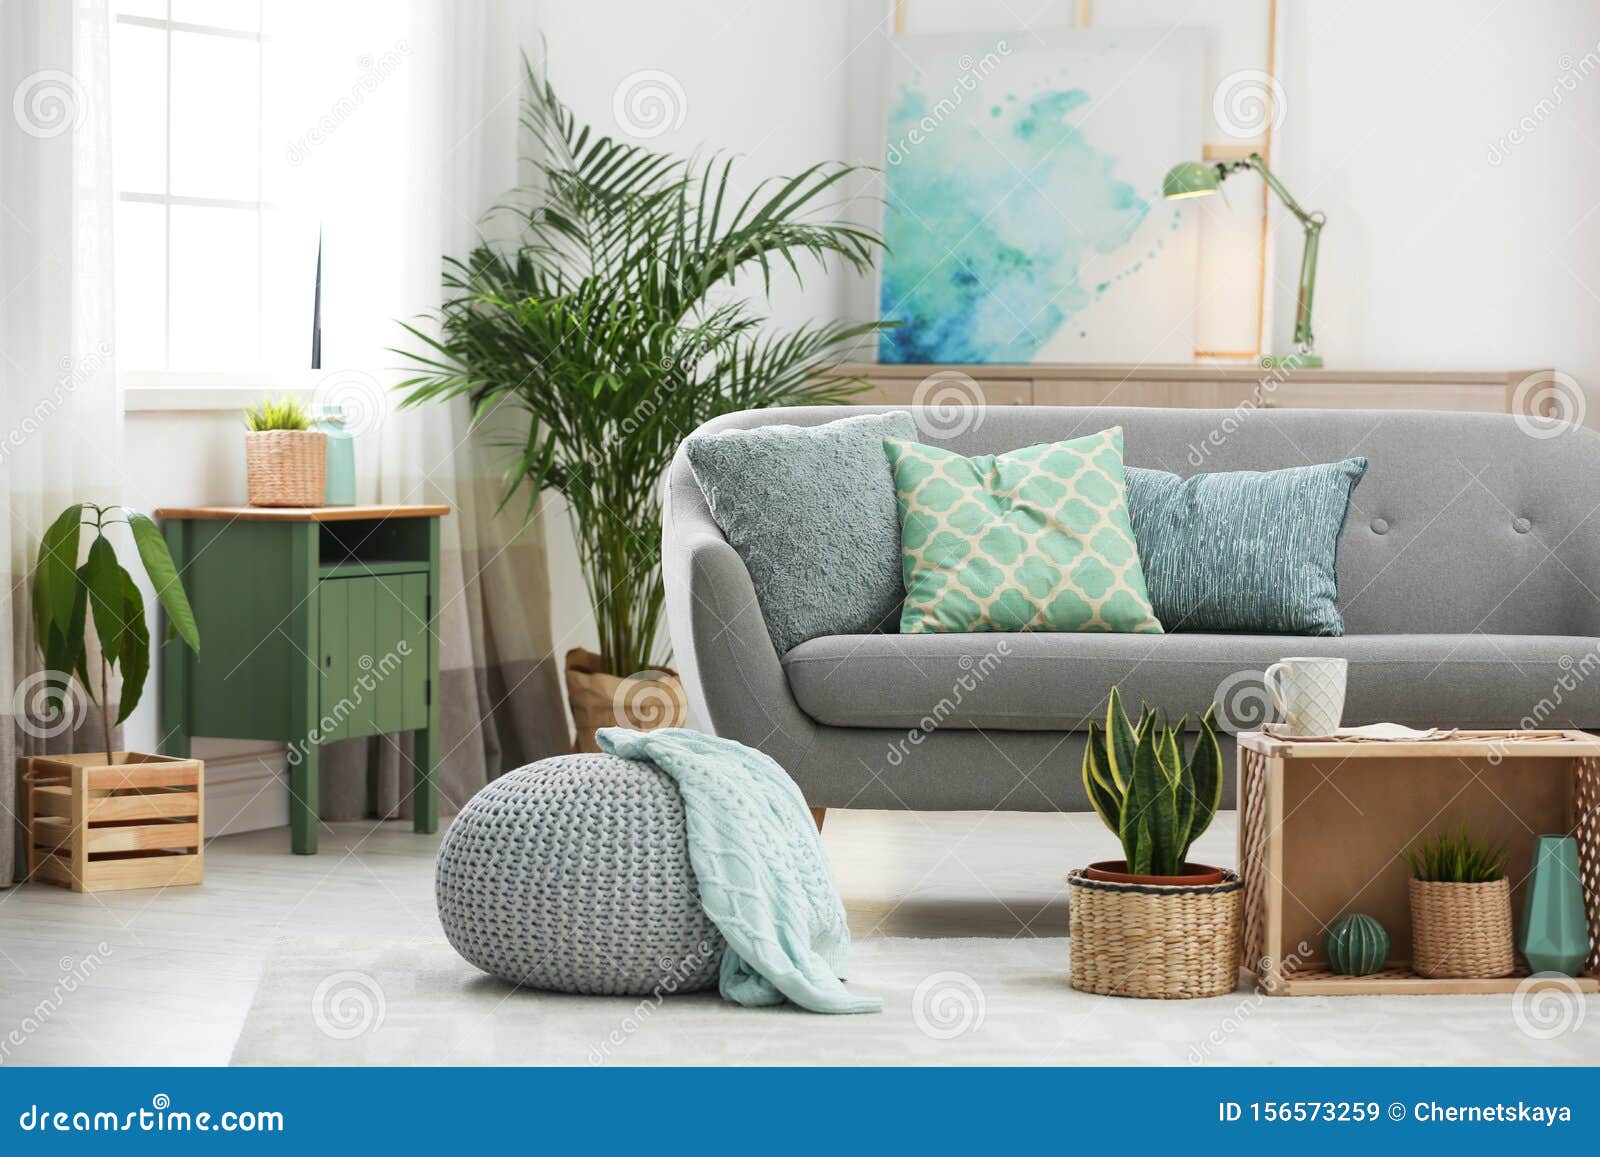 living room interior with houseplants and sofa